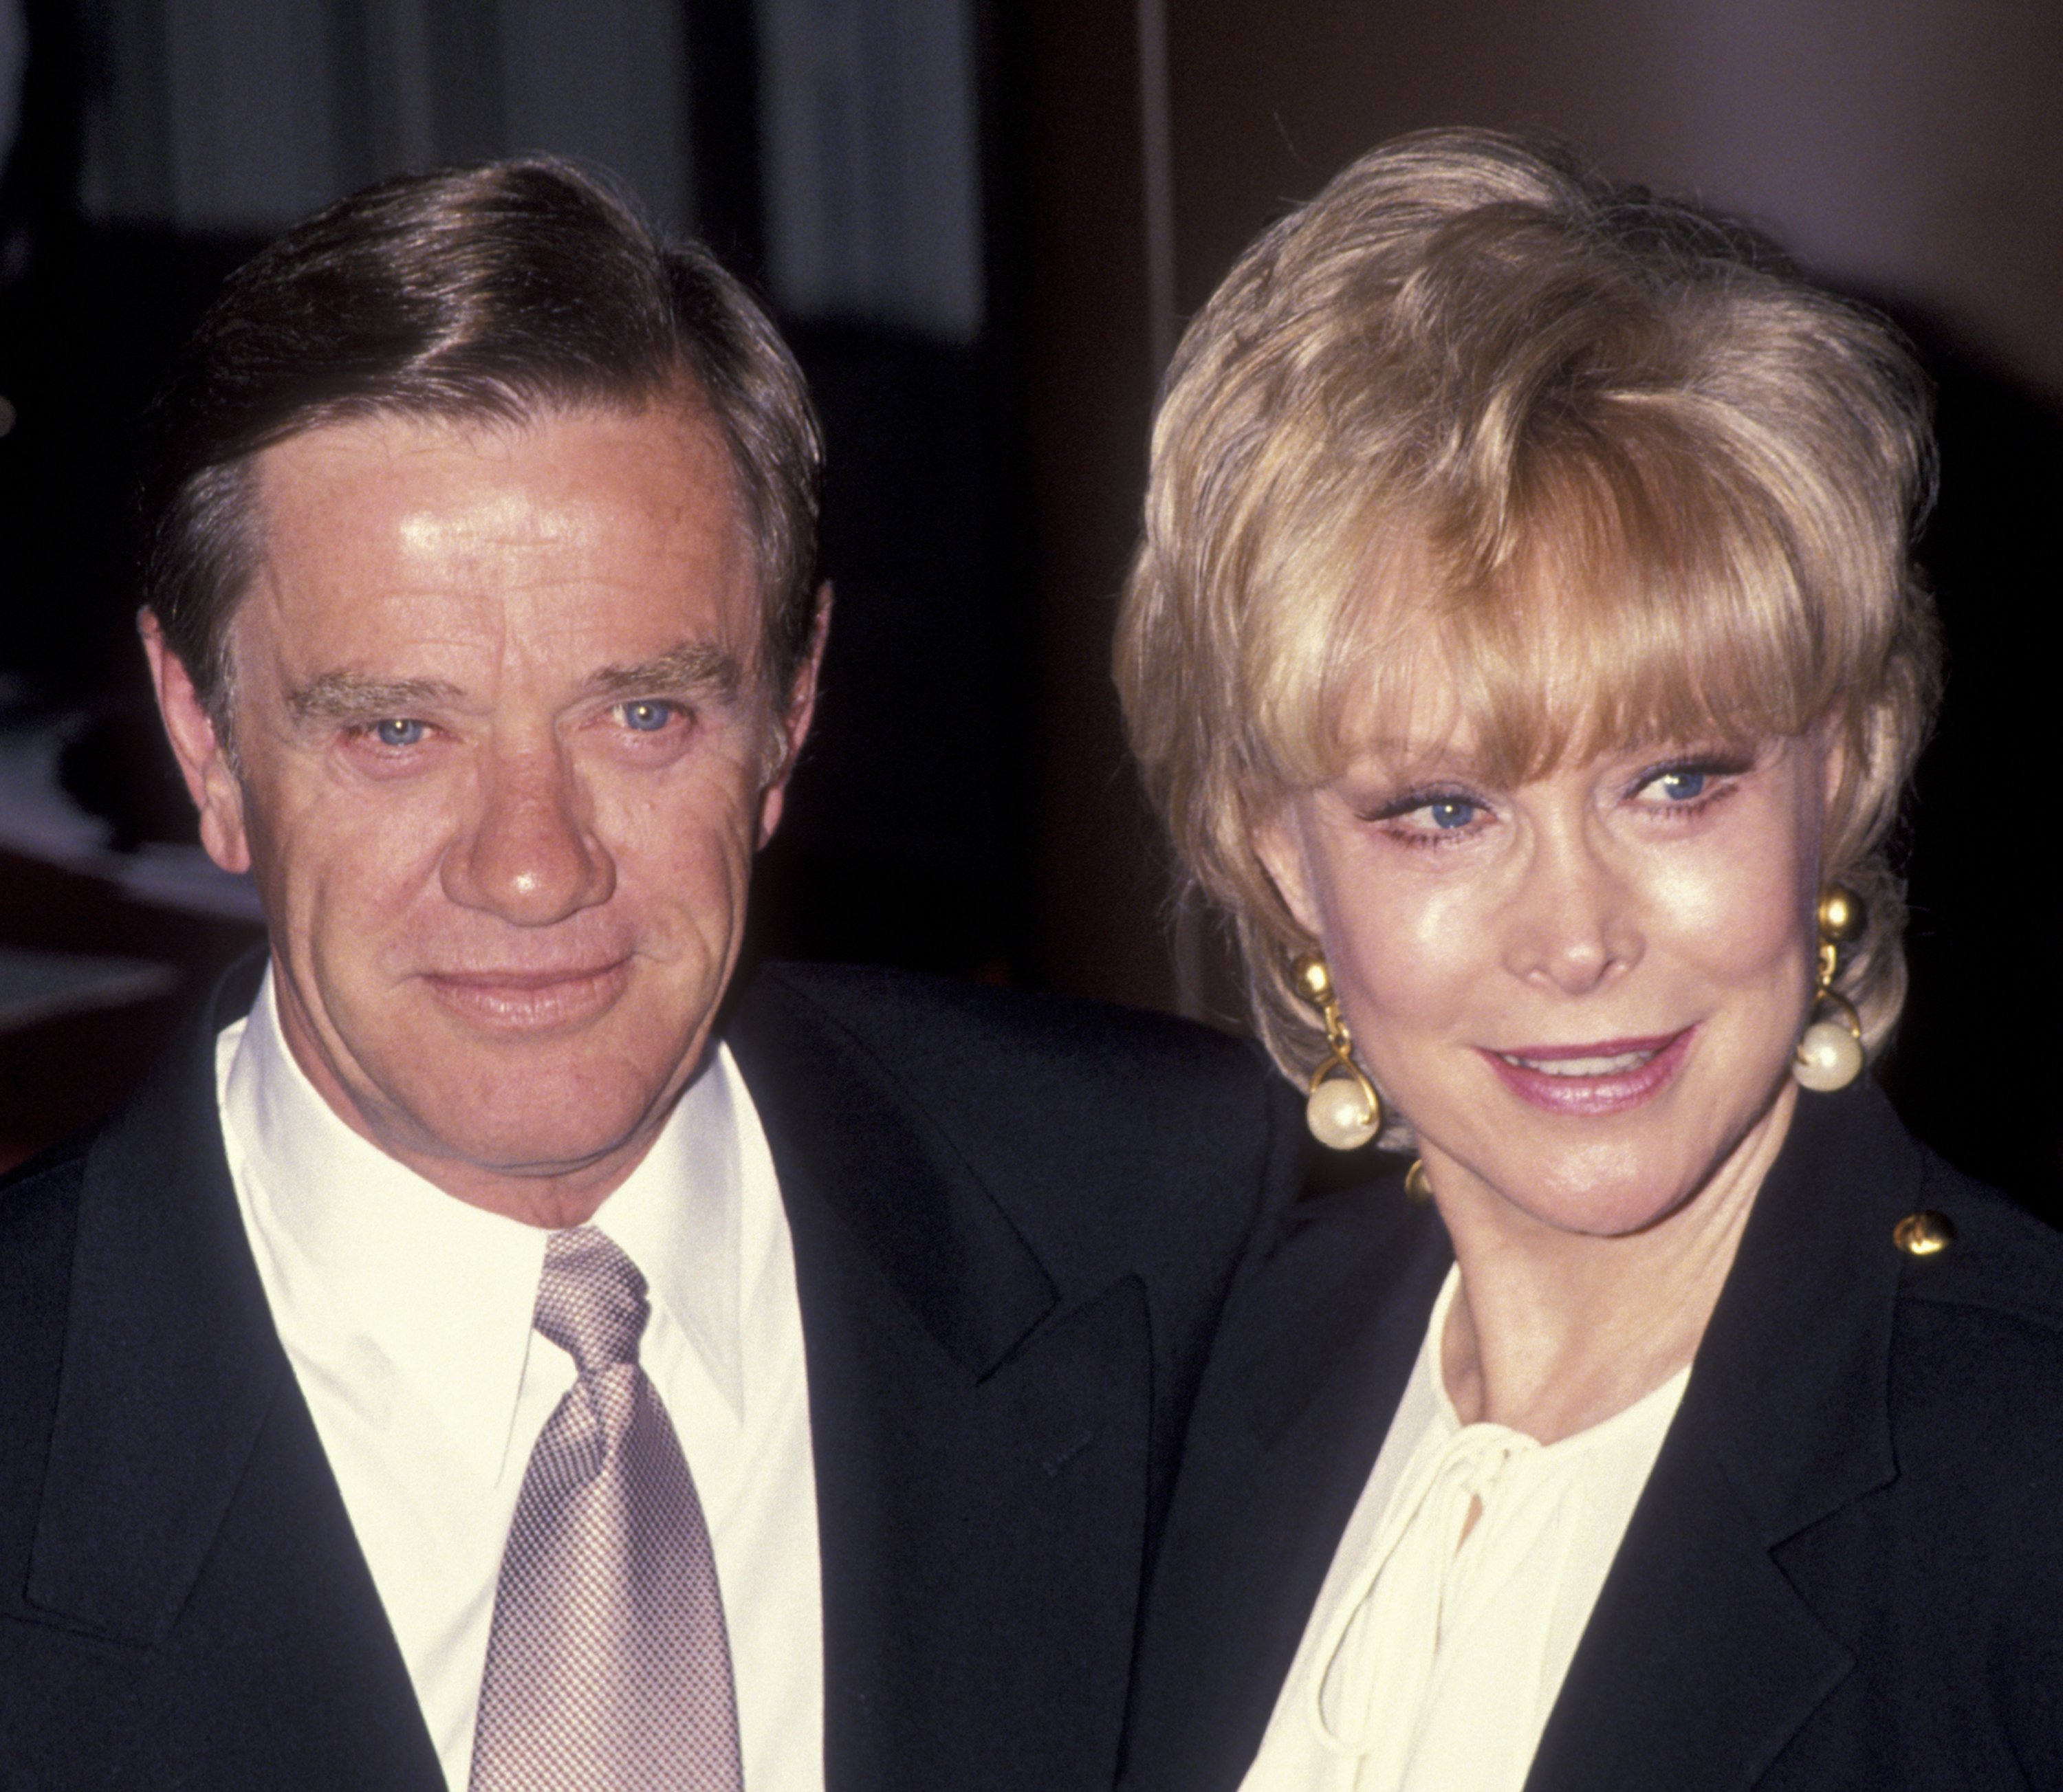  Actress Barbara Eden and John Eicholtz attend Writer's Guild of America Gala Honoring Robert Blake on October 24, 1993 at the Director's Guild Theater in Hollywood, California | Source: Getty Images 